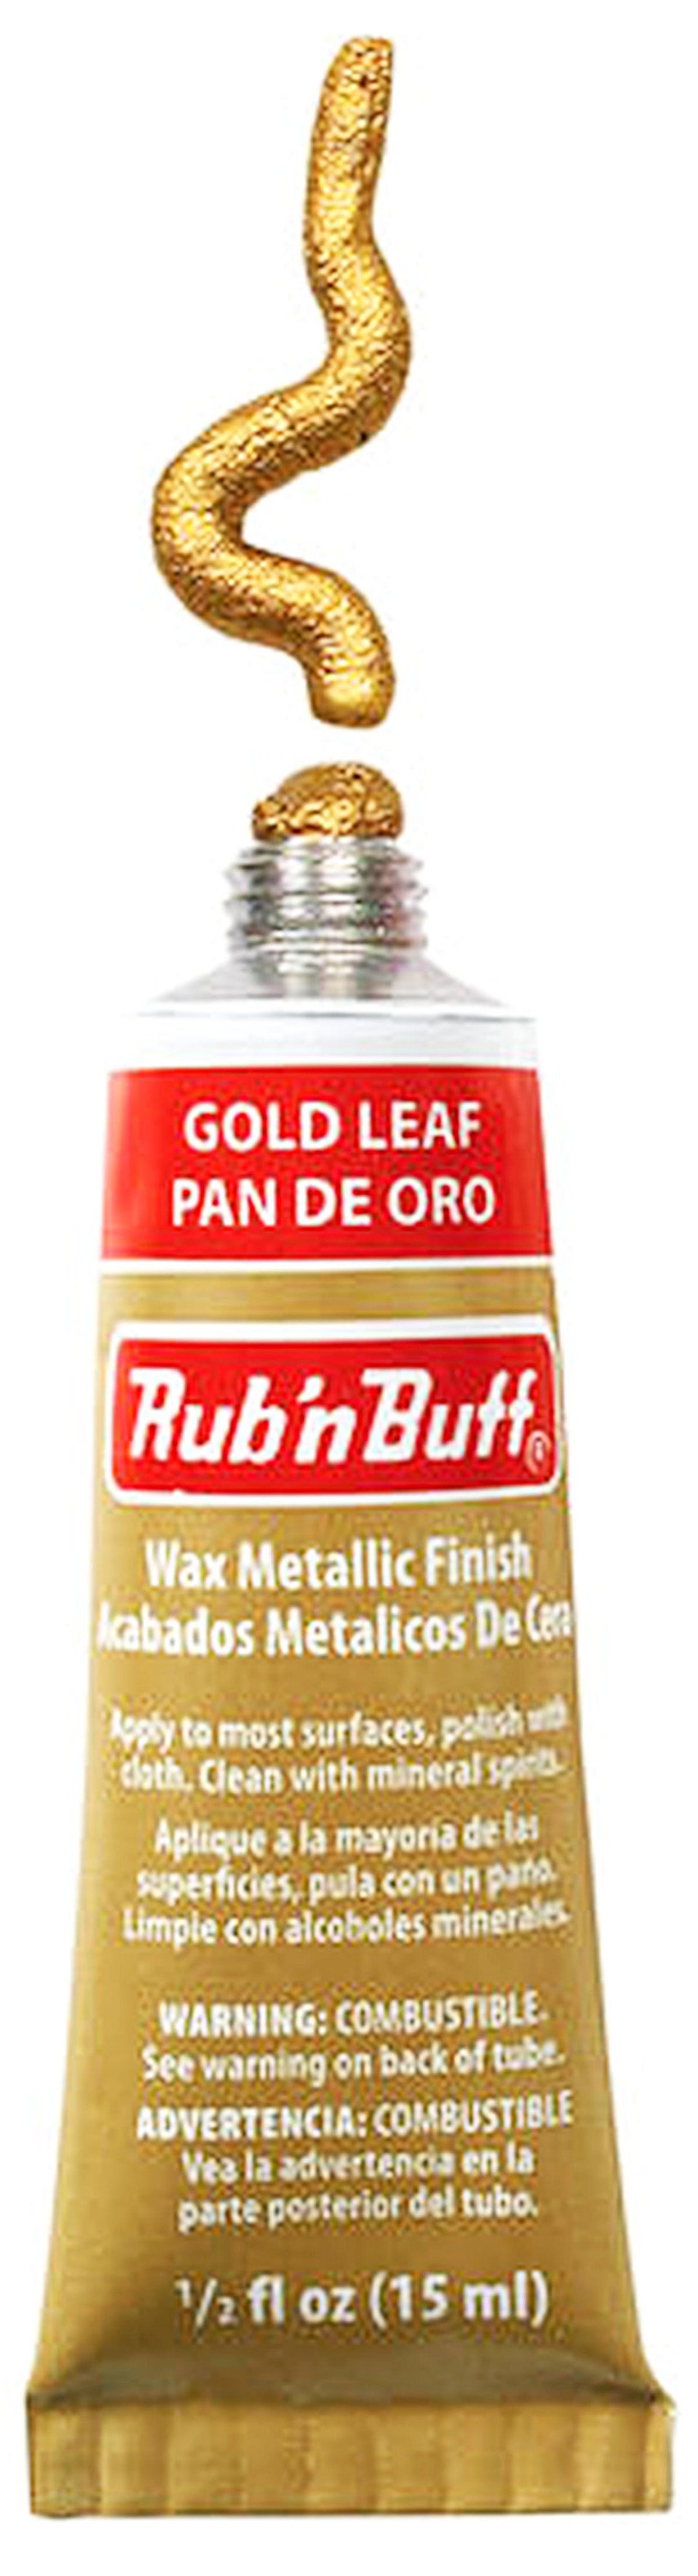  Adding Copper and Gold into My Kitchen- Rub n Buff Review